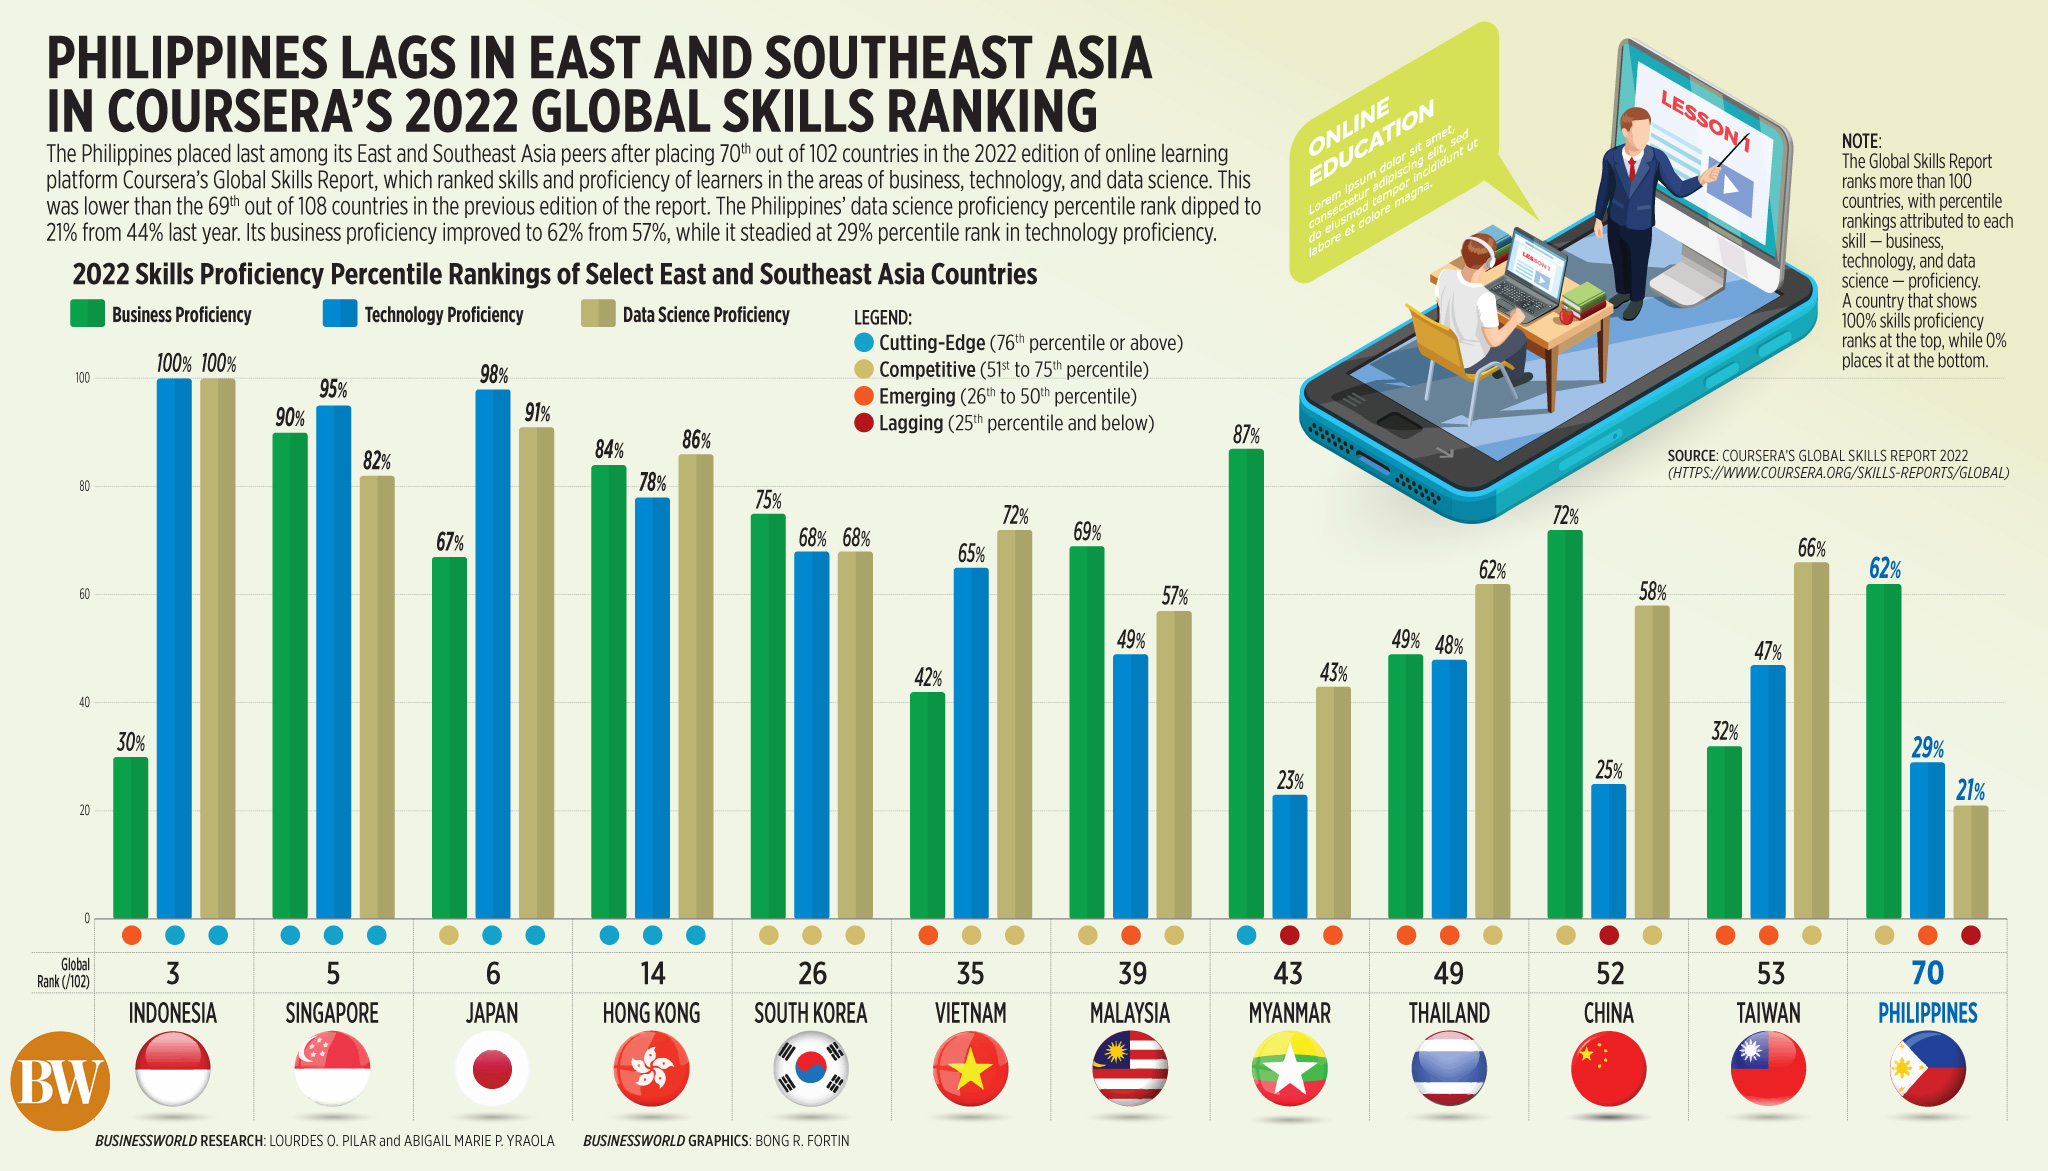 Philippines lags in East and Southeast Asia in Coursera’s 2022 Global Skills Ranking